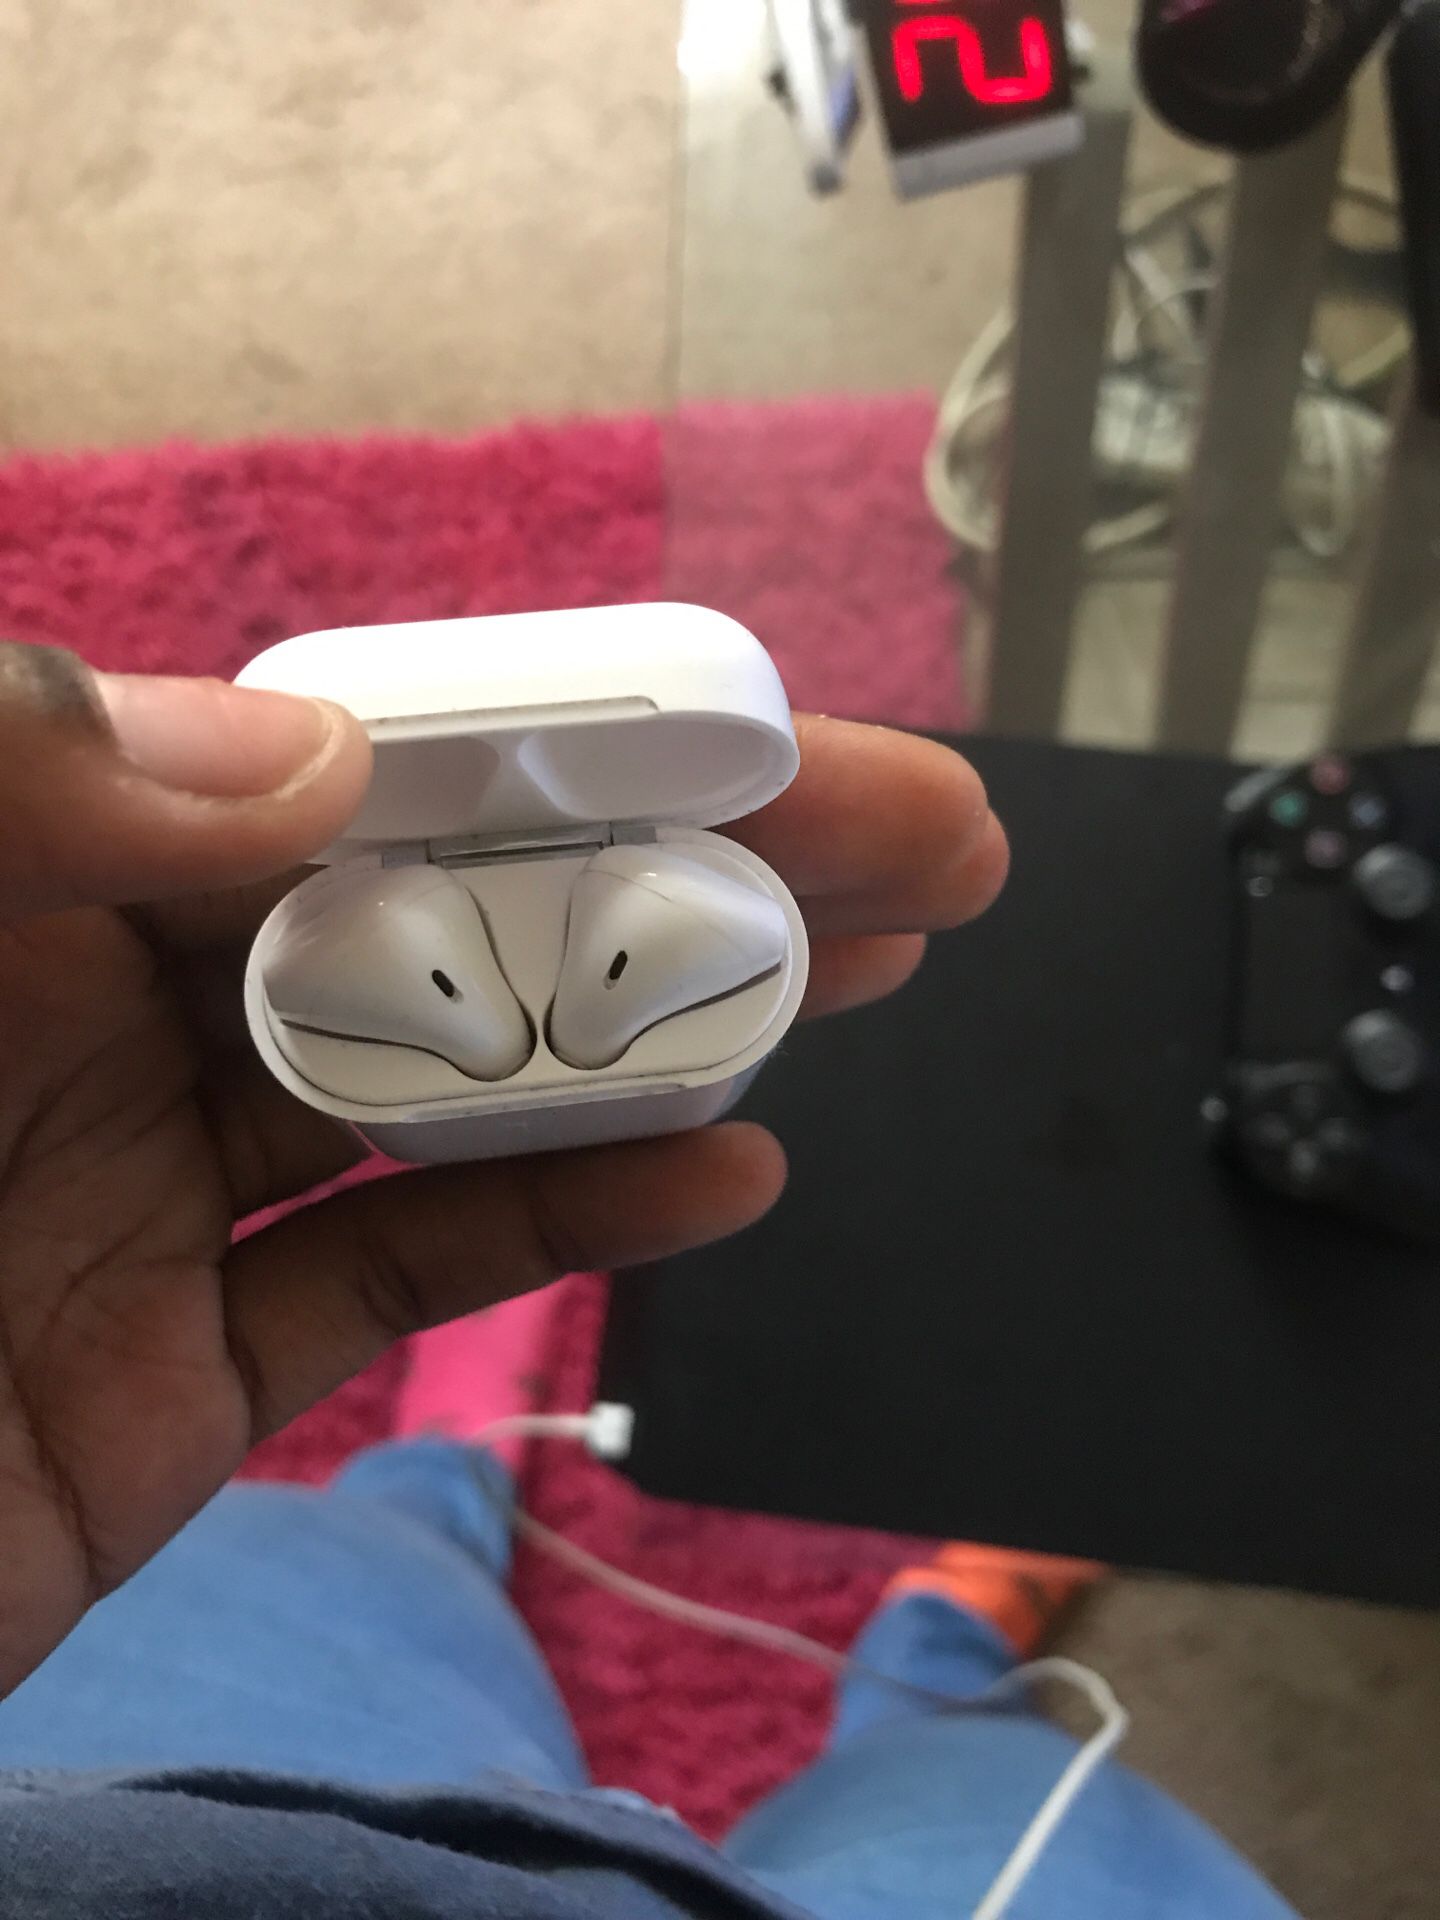 New white I7S TWS Dual Wireless Bluetooth Headset Earbuds like Airpods Compatible with IOS and Android